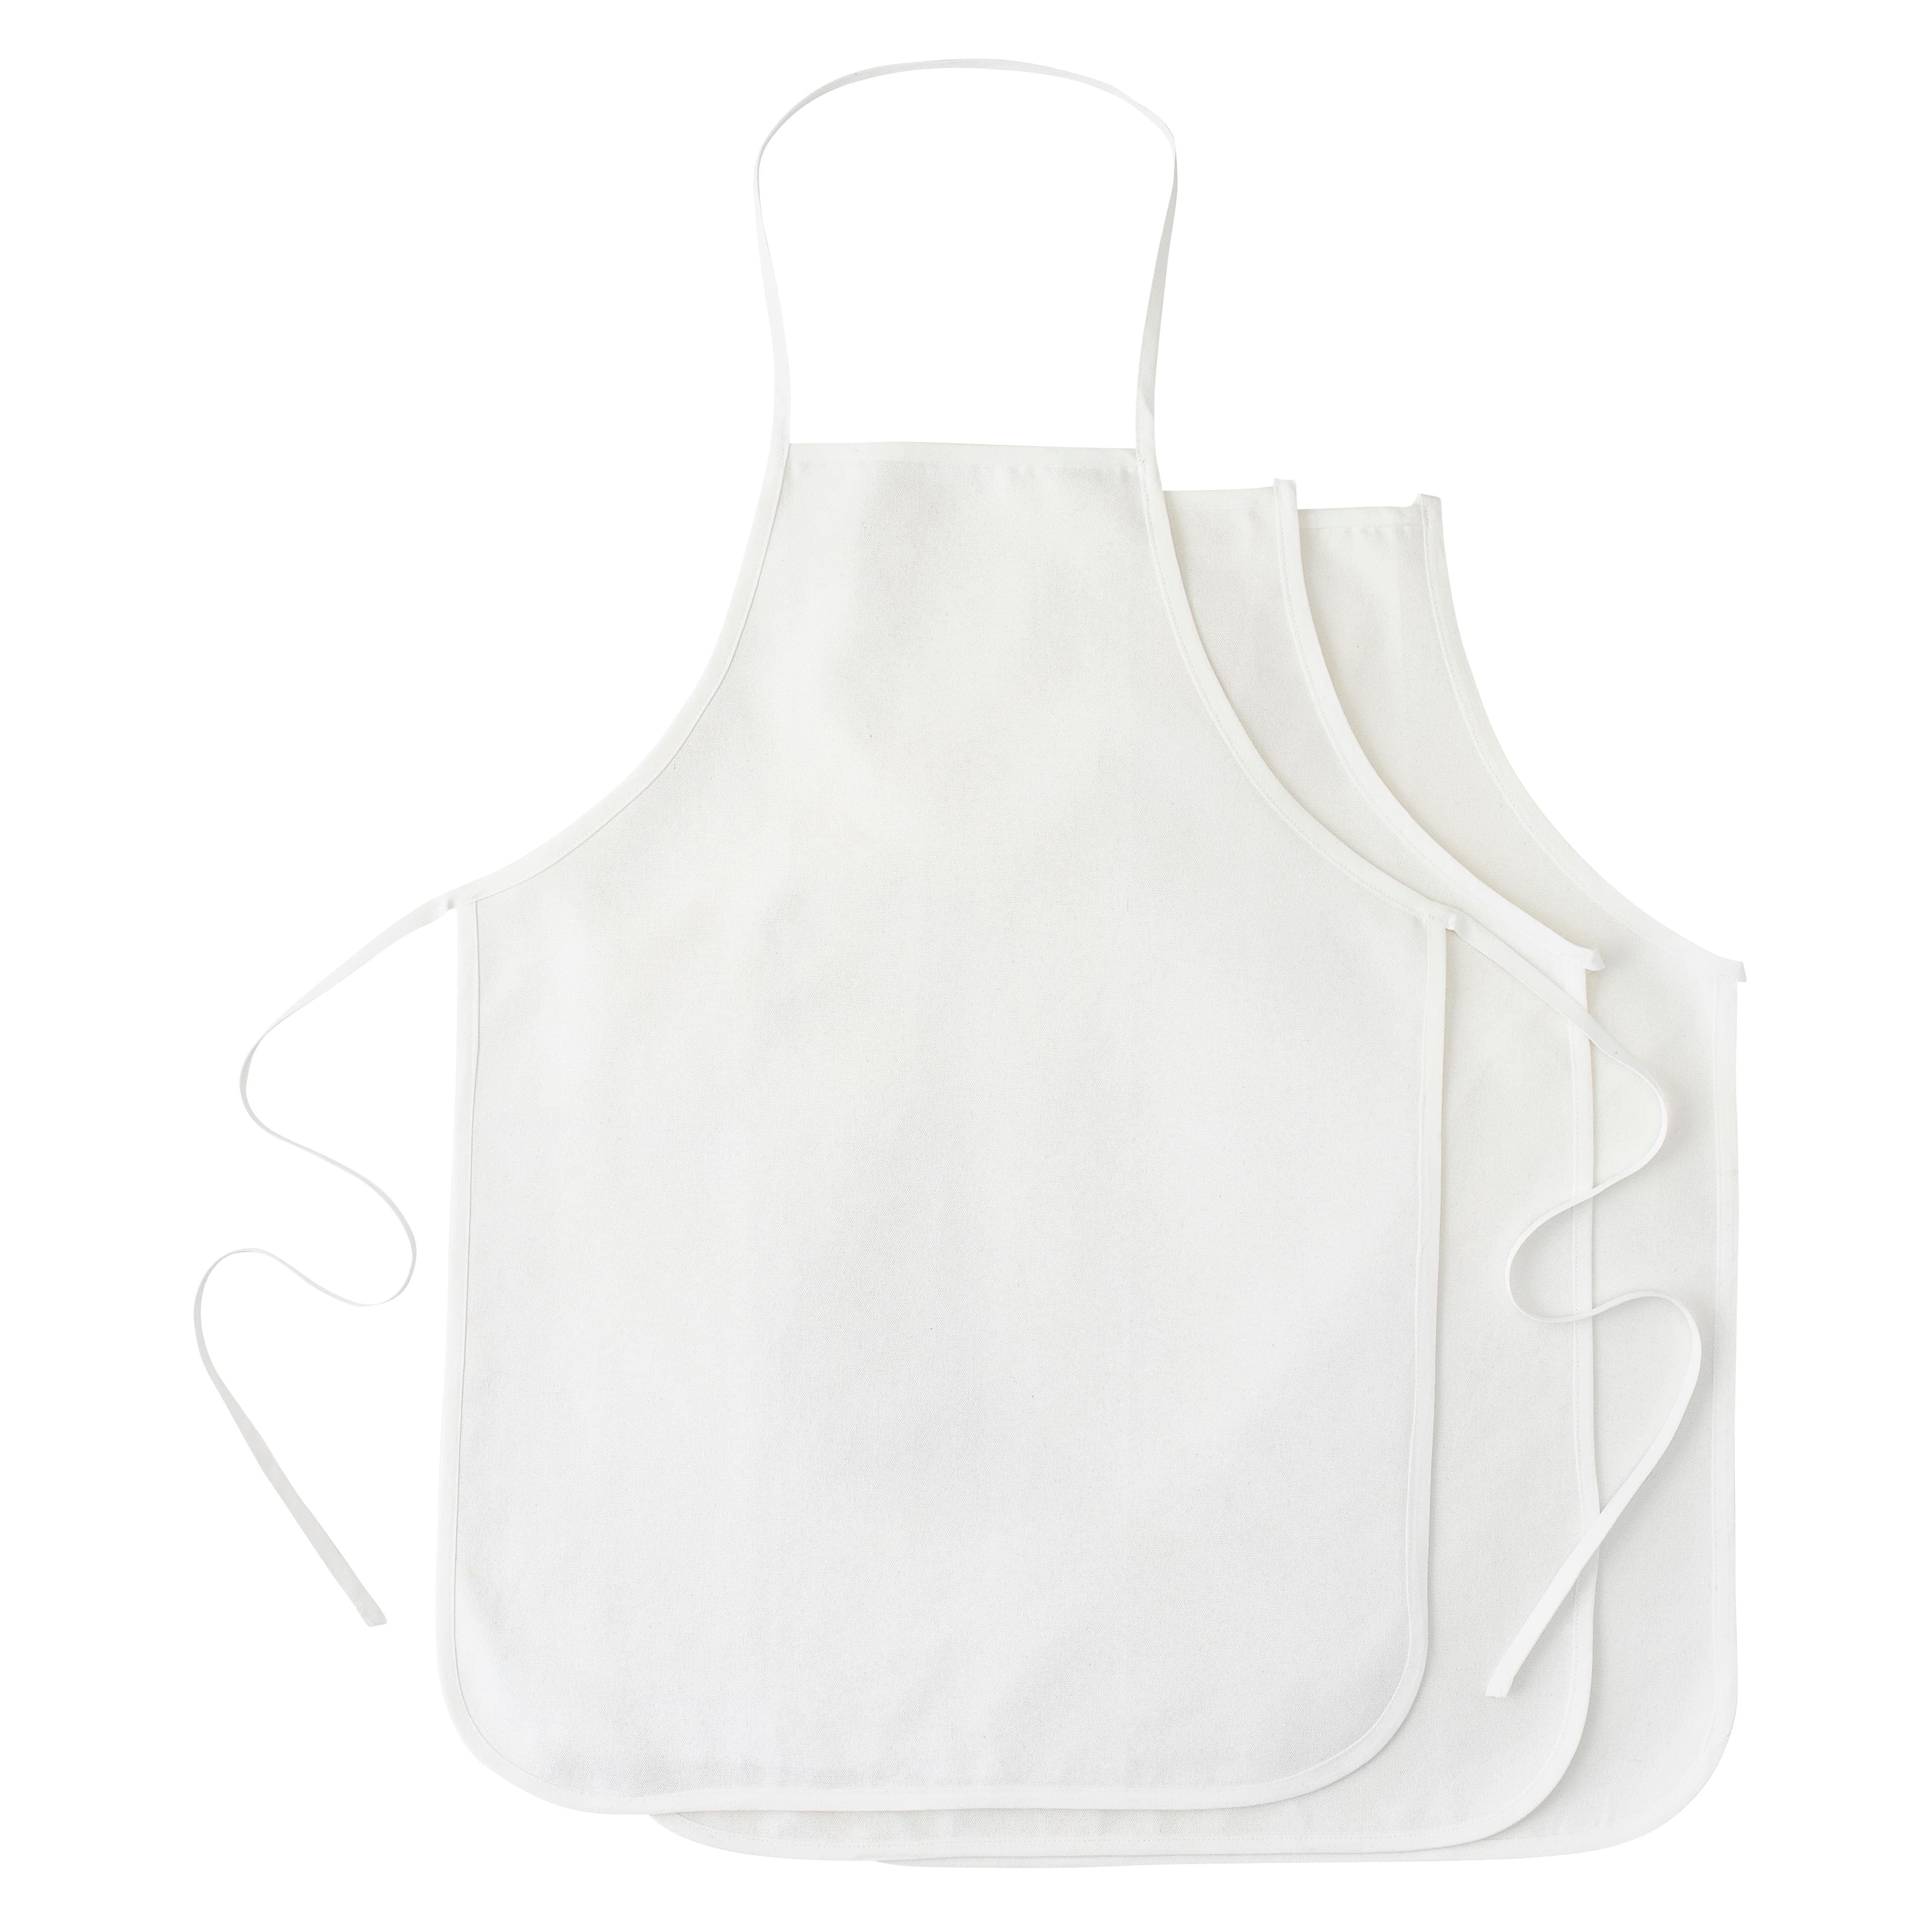 Adult Sewing Class: Fleece Vests, Aprons and Pillow Cases